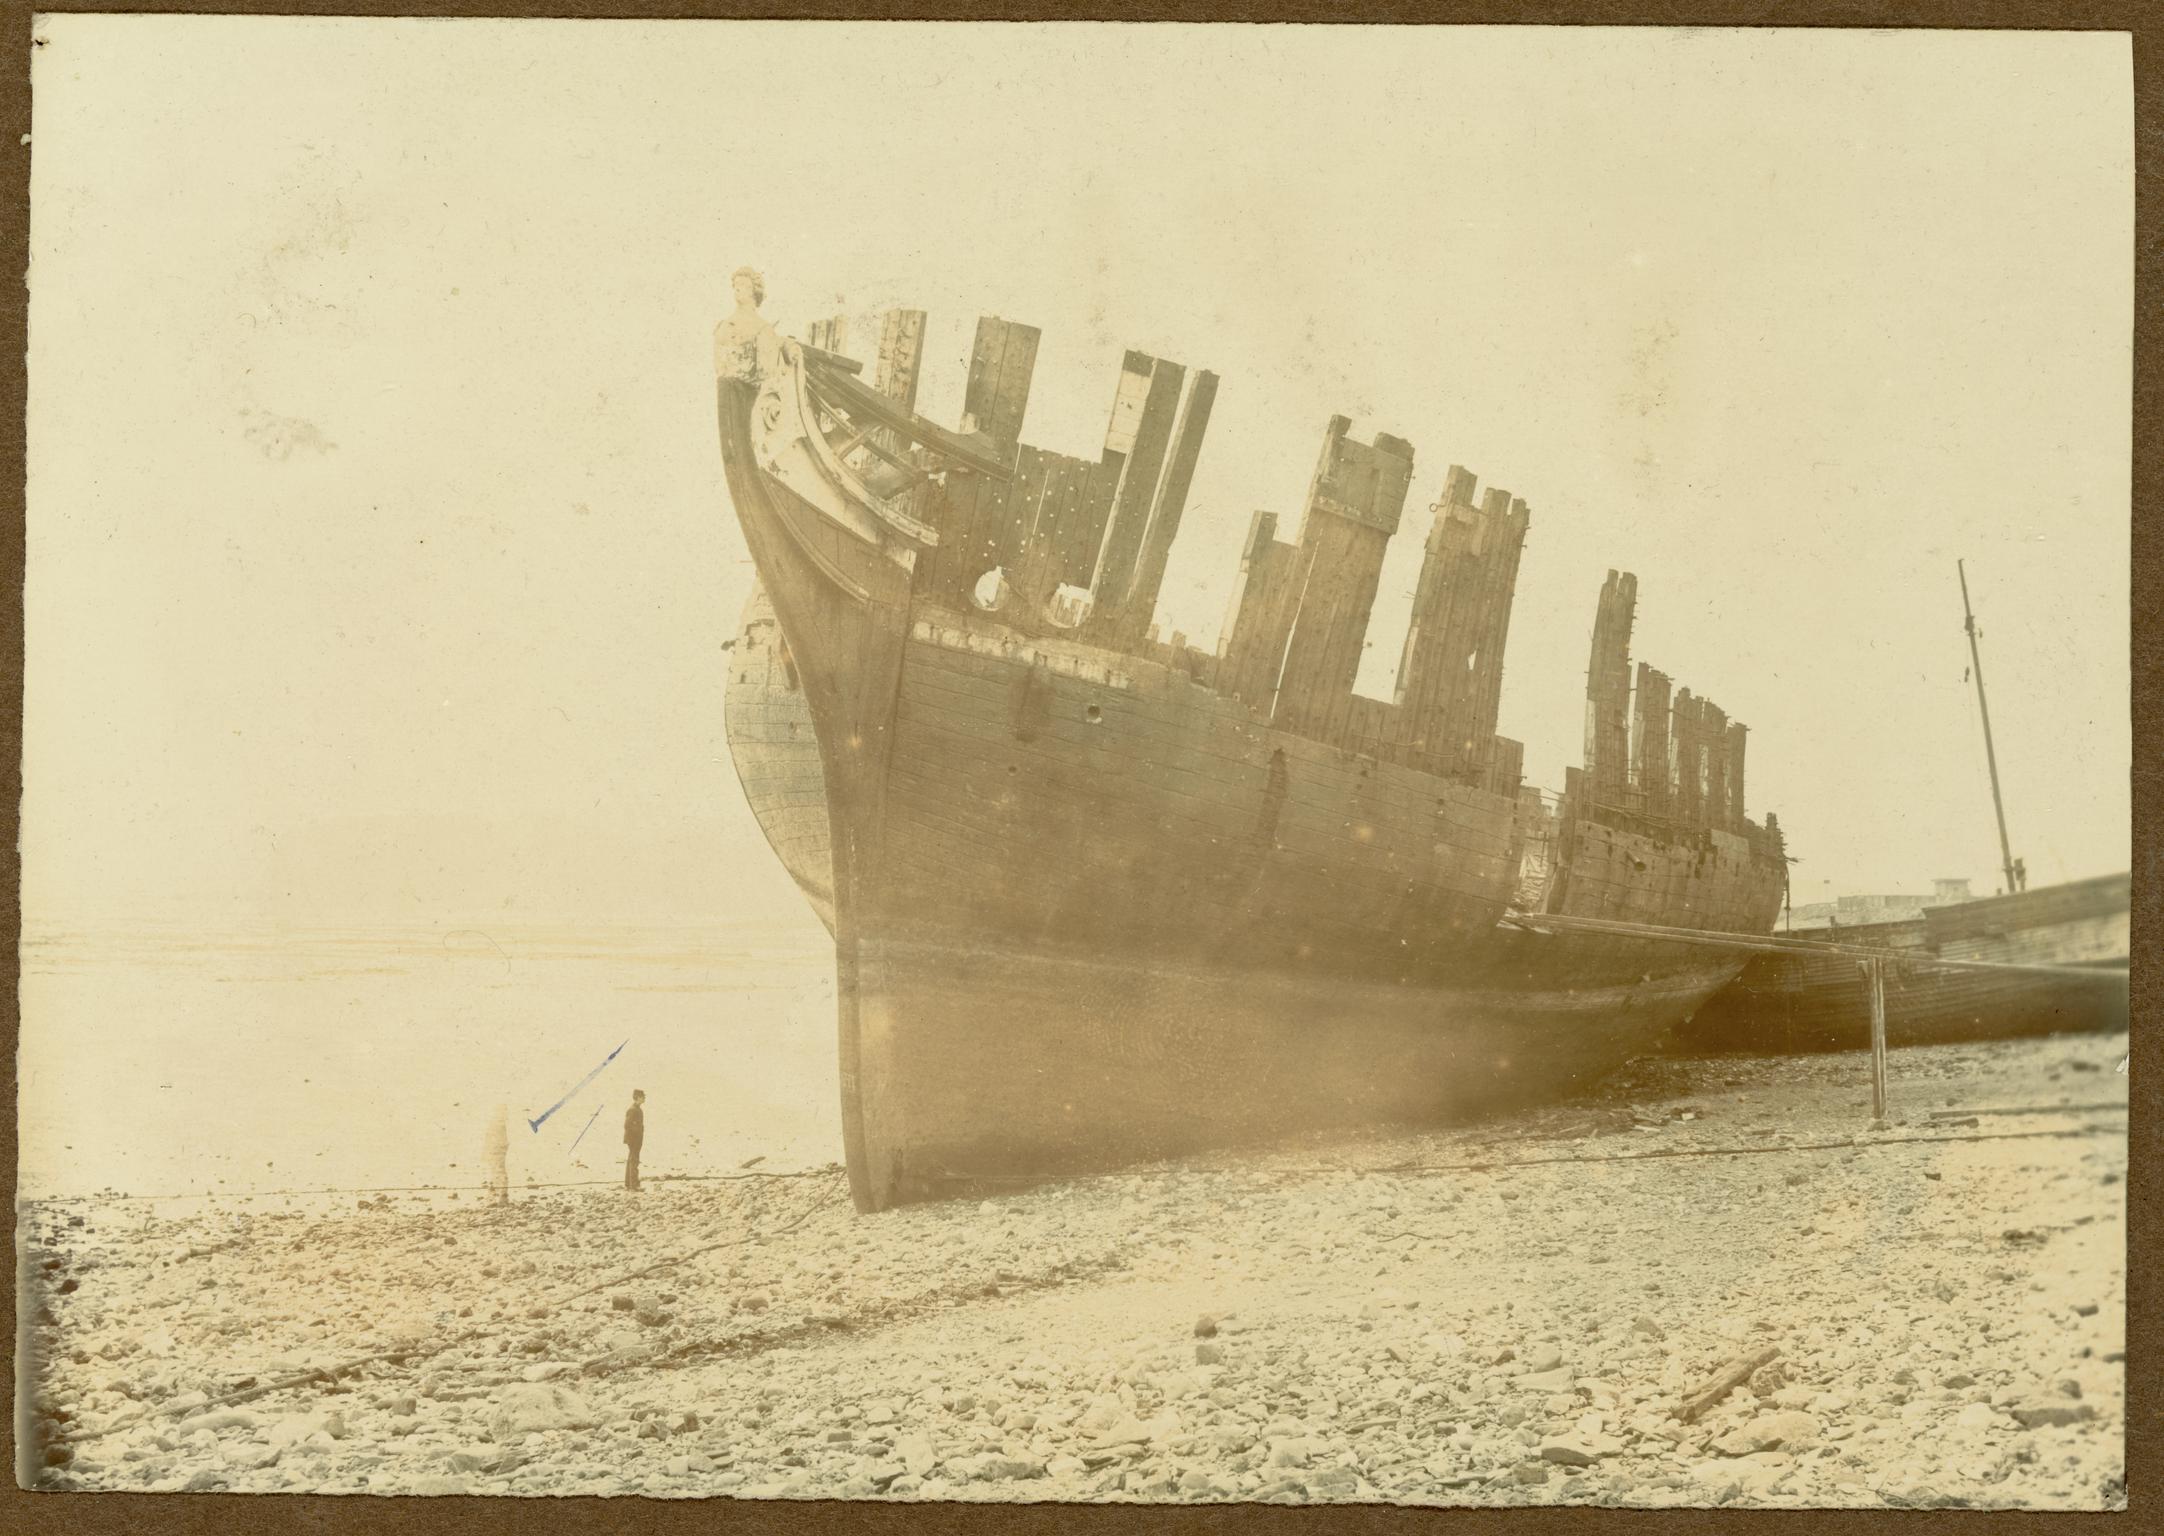 H.M.S. THISBE, photograph